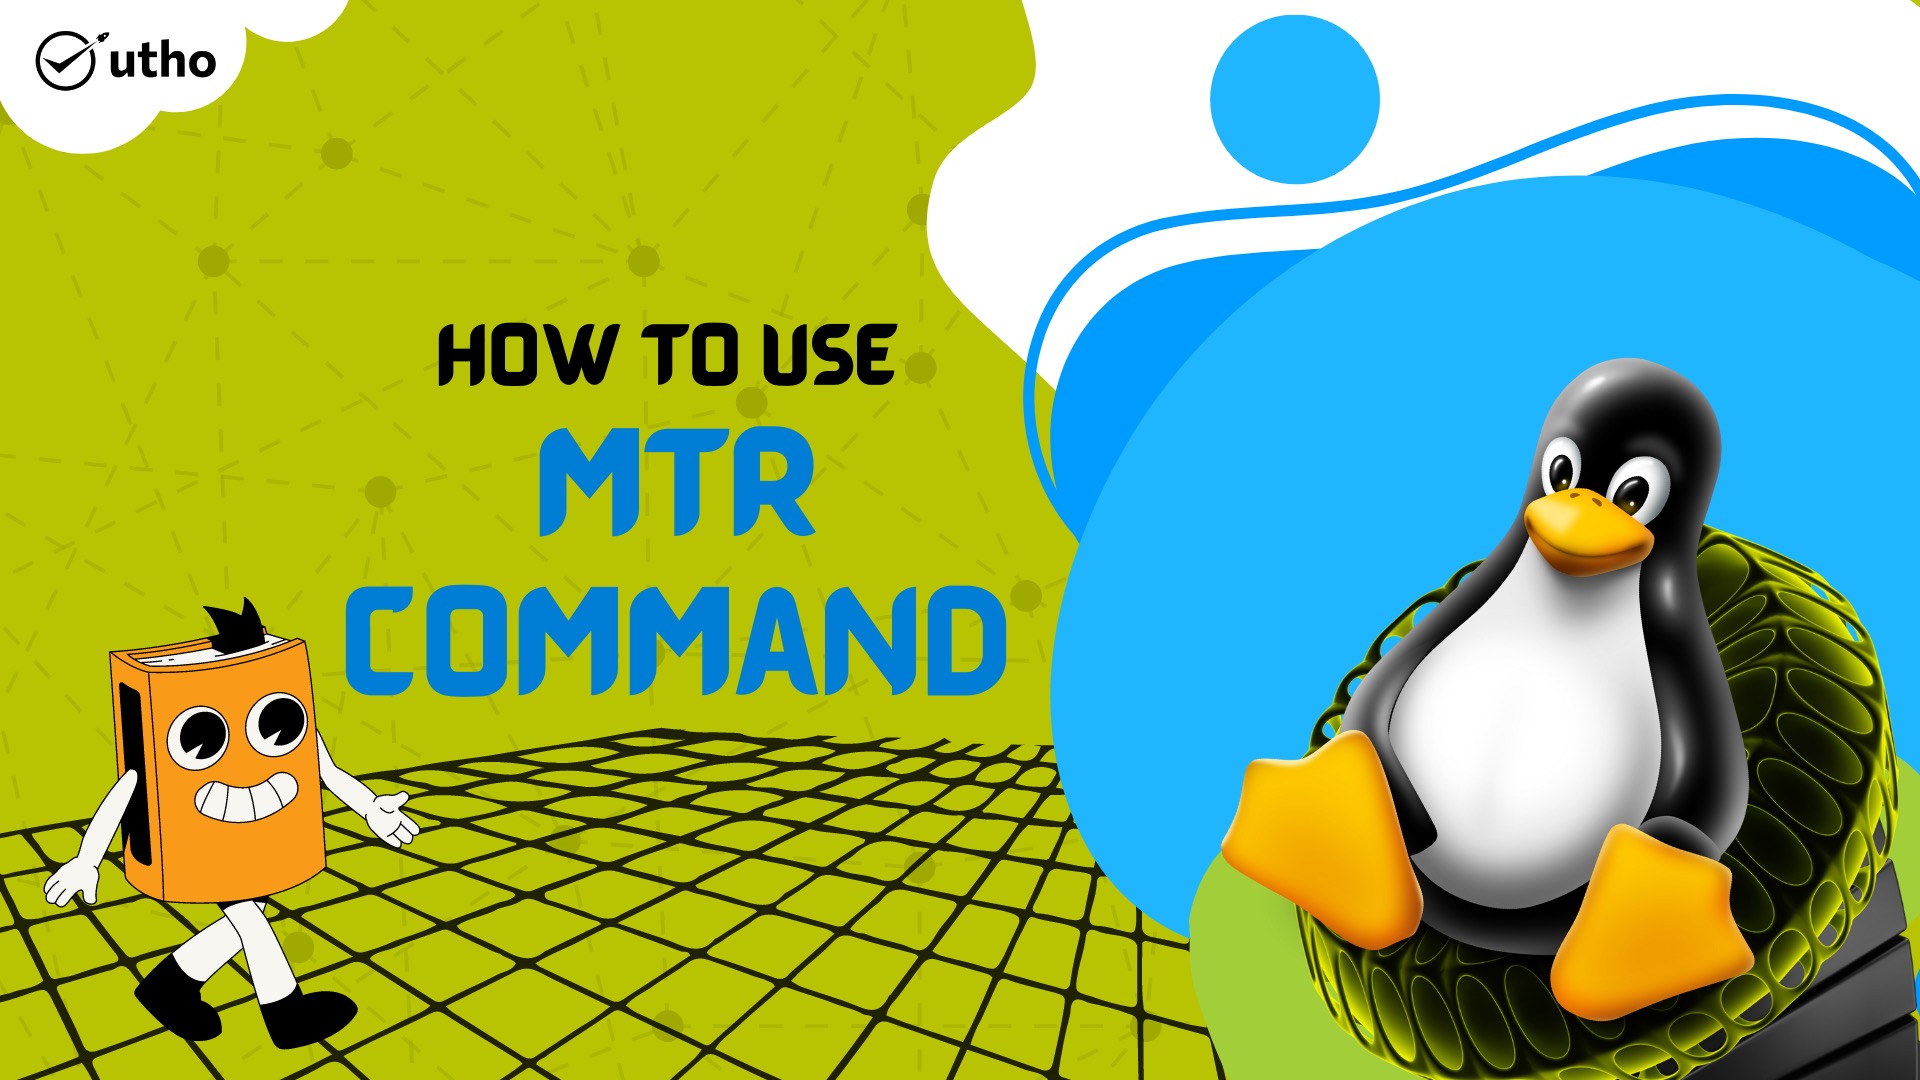 How to use MTR command in Linux